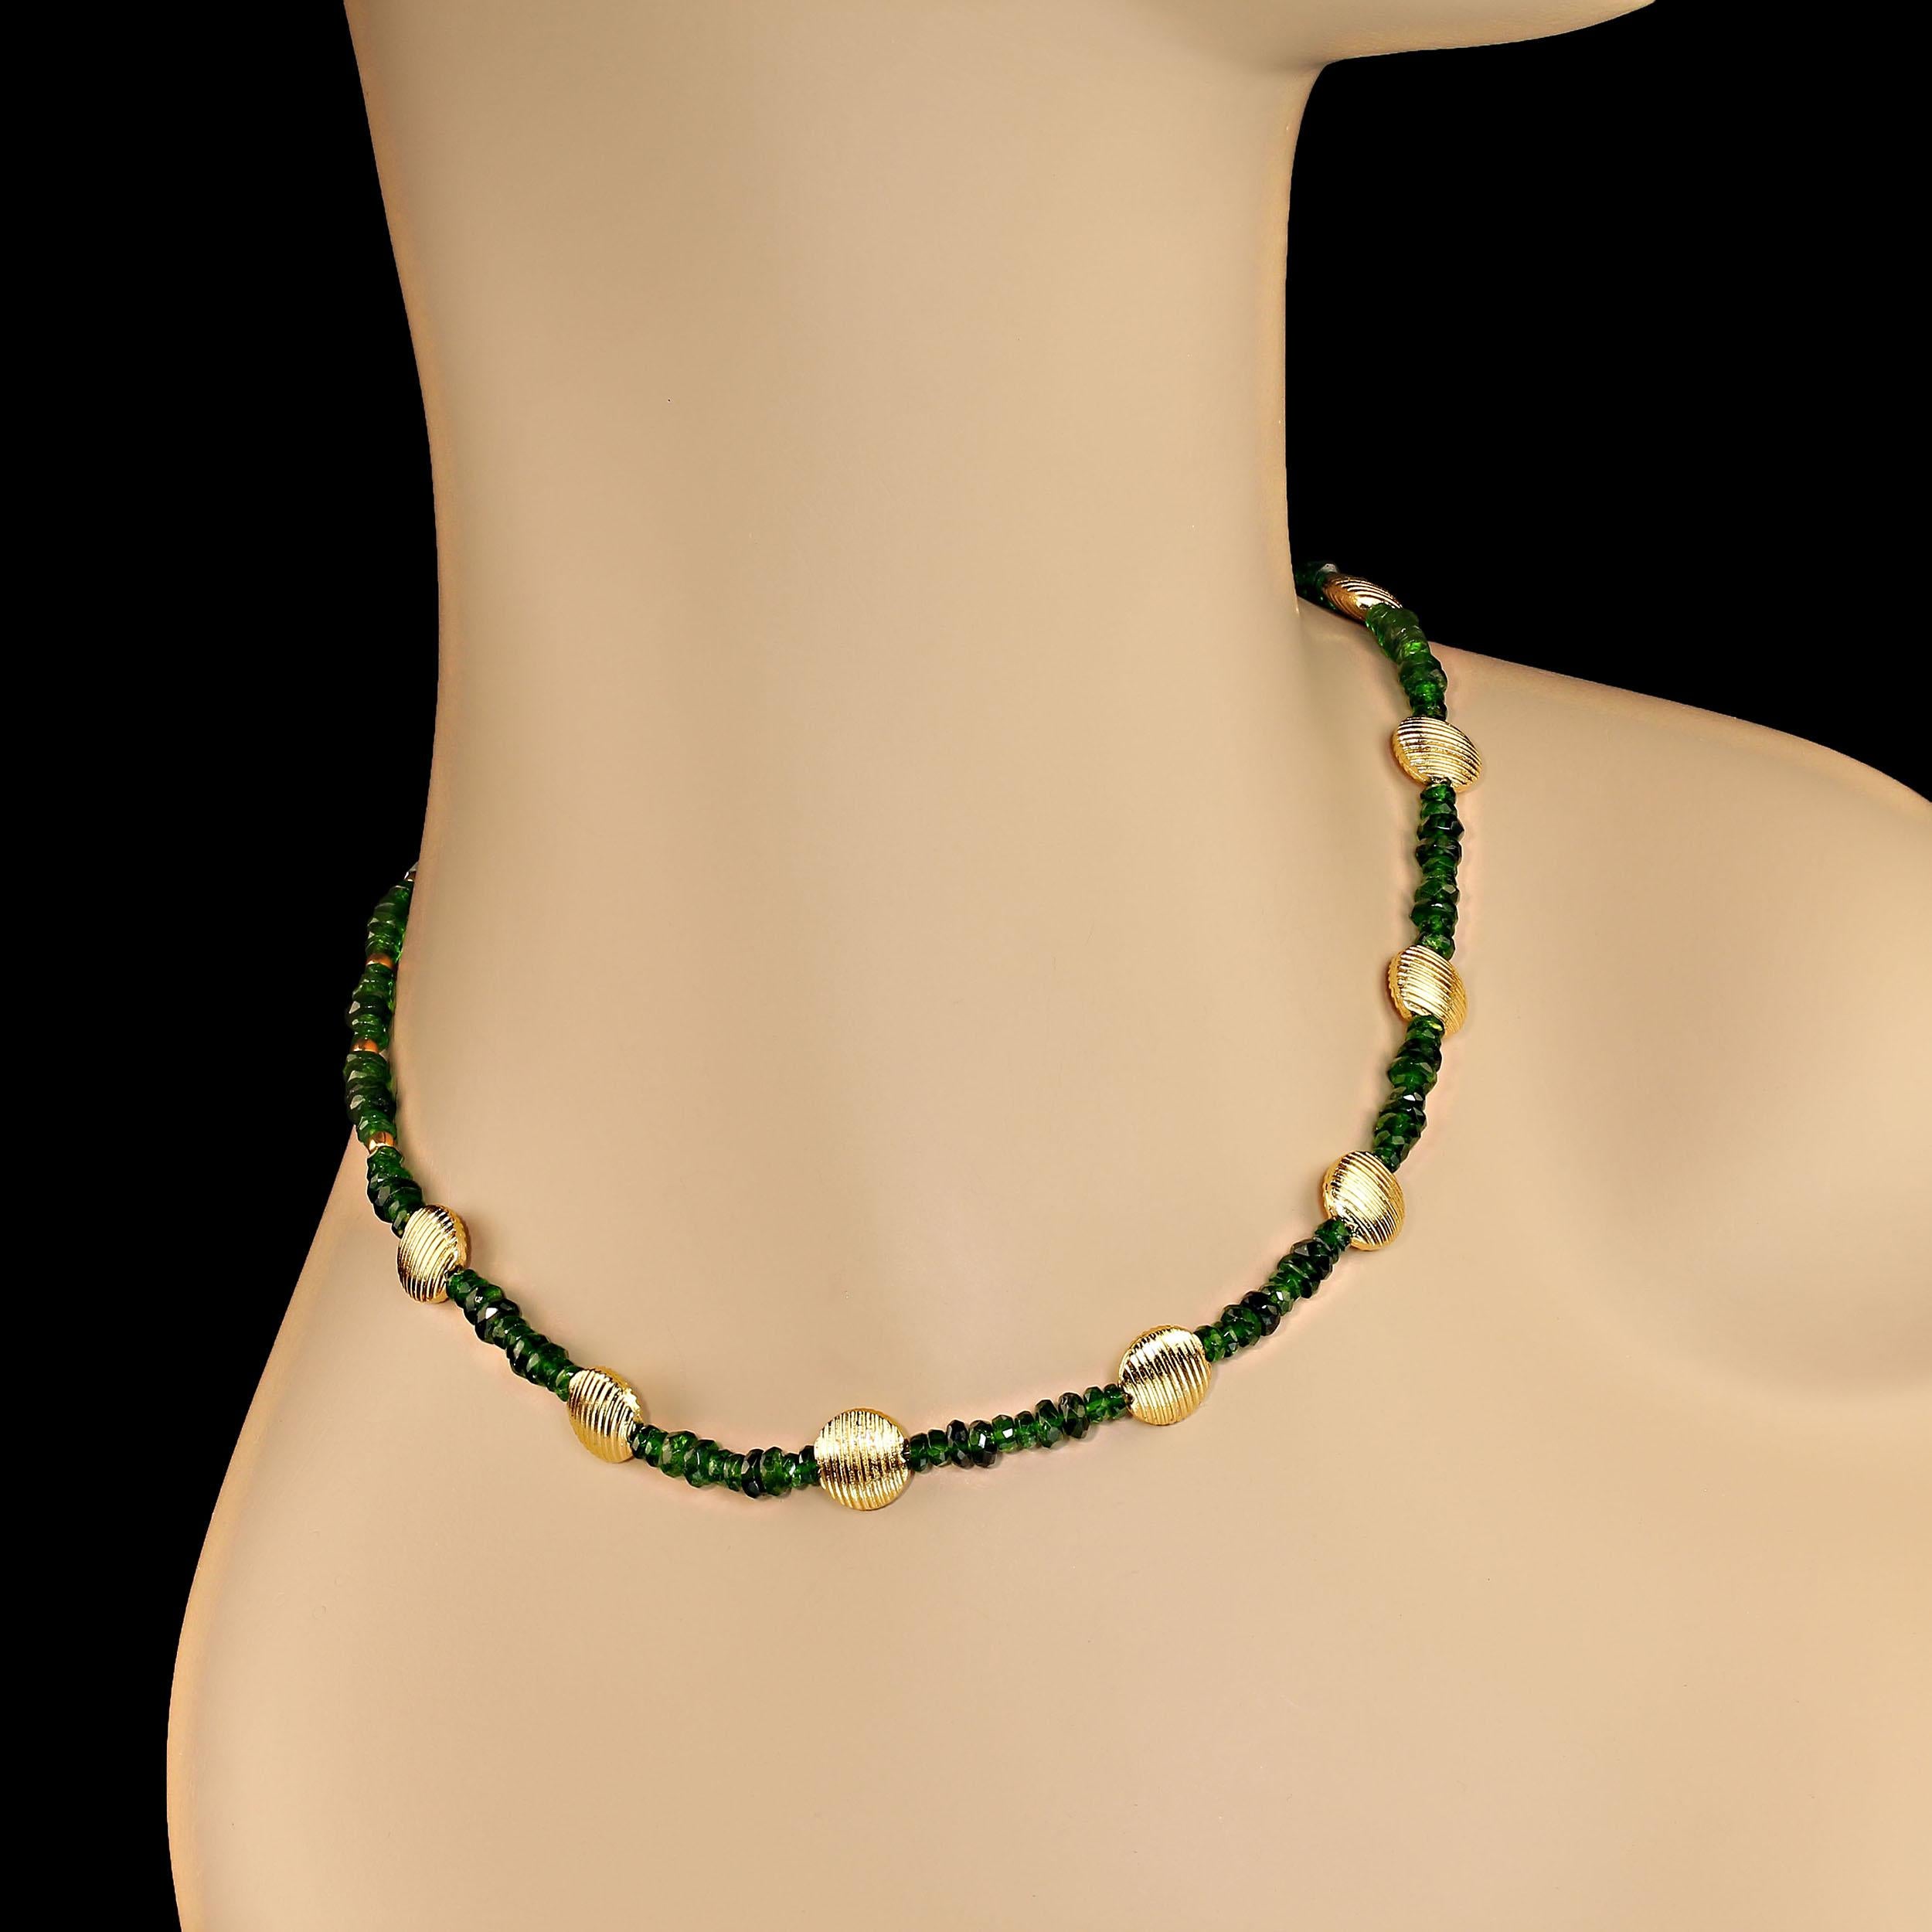 This is a full-on GREEN chrome diopside necklace.  If you want a green necklace this is for you.  This necklace has two stations on the gold-plated toggle clasp, 17 and 18 inches. The chrome diopside rondelles are 3 and 5 mm and accented with